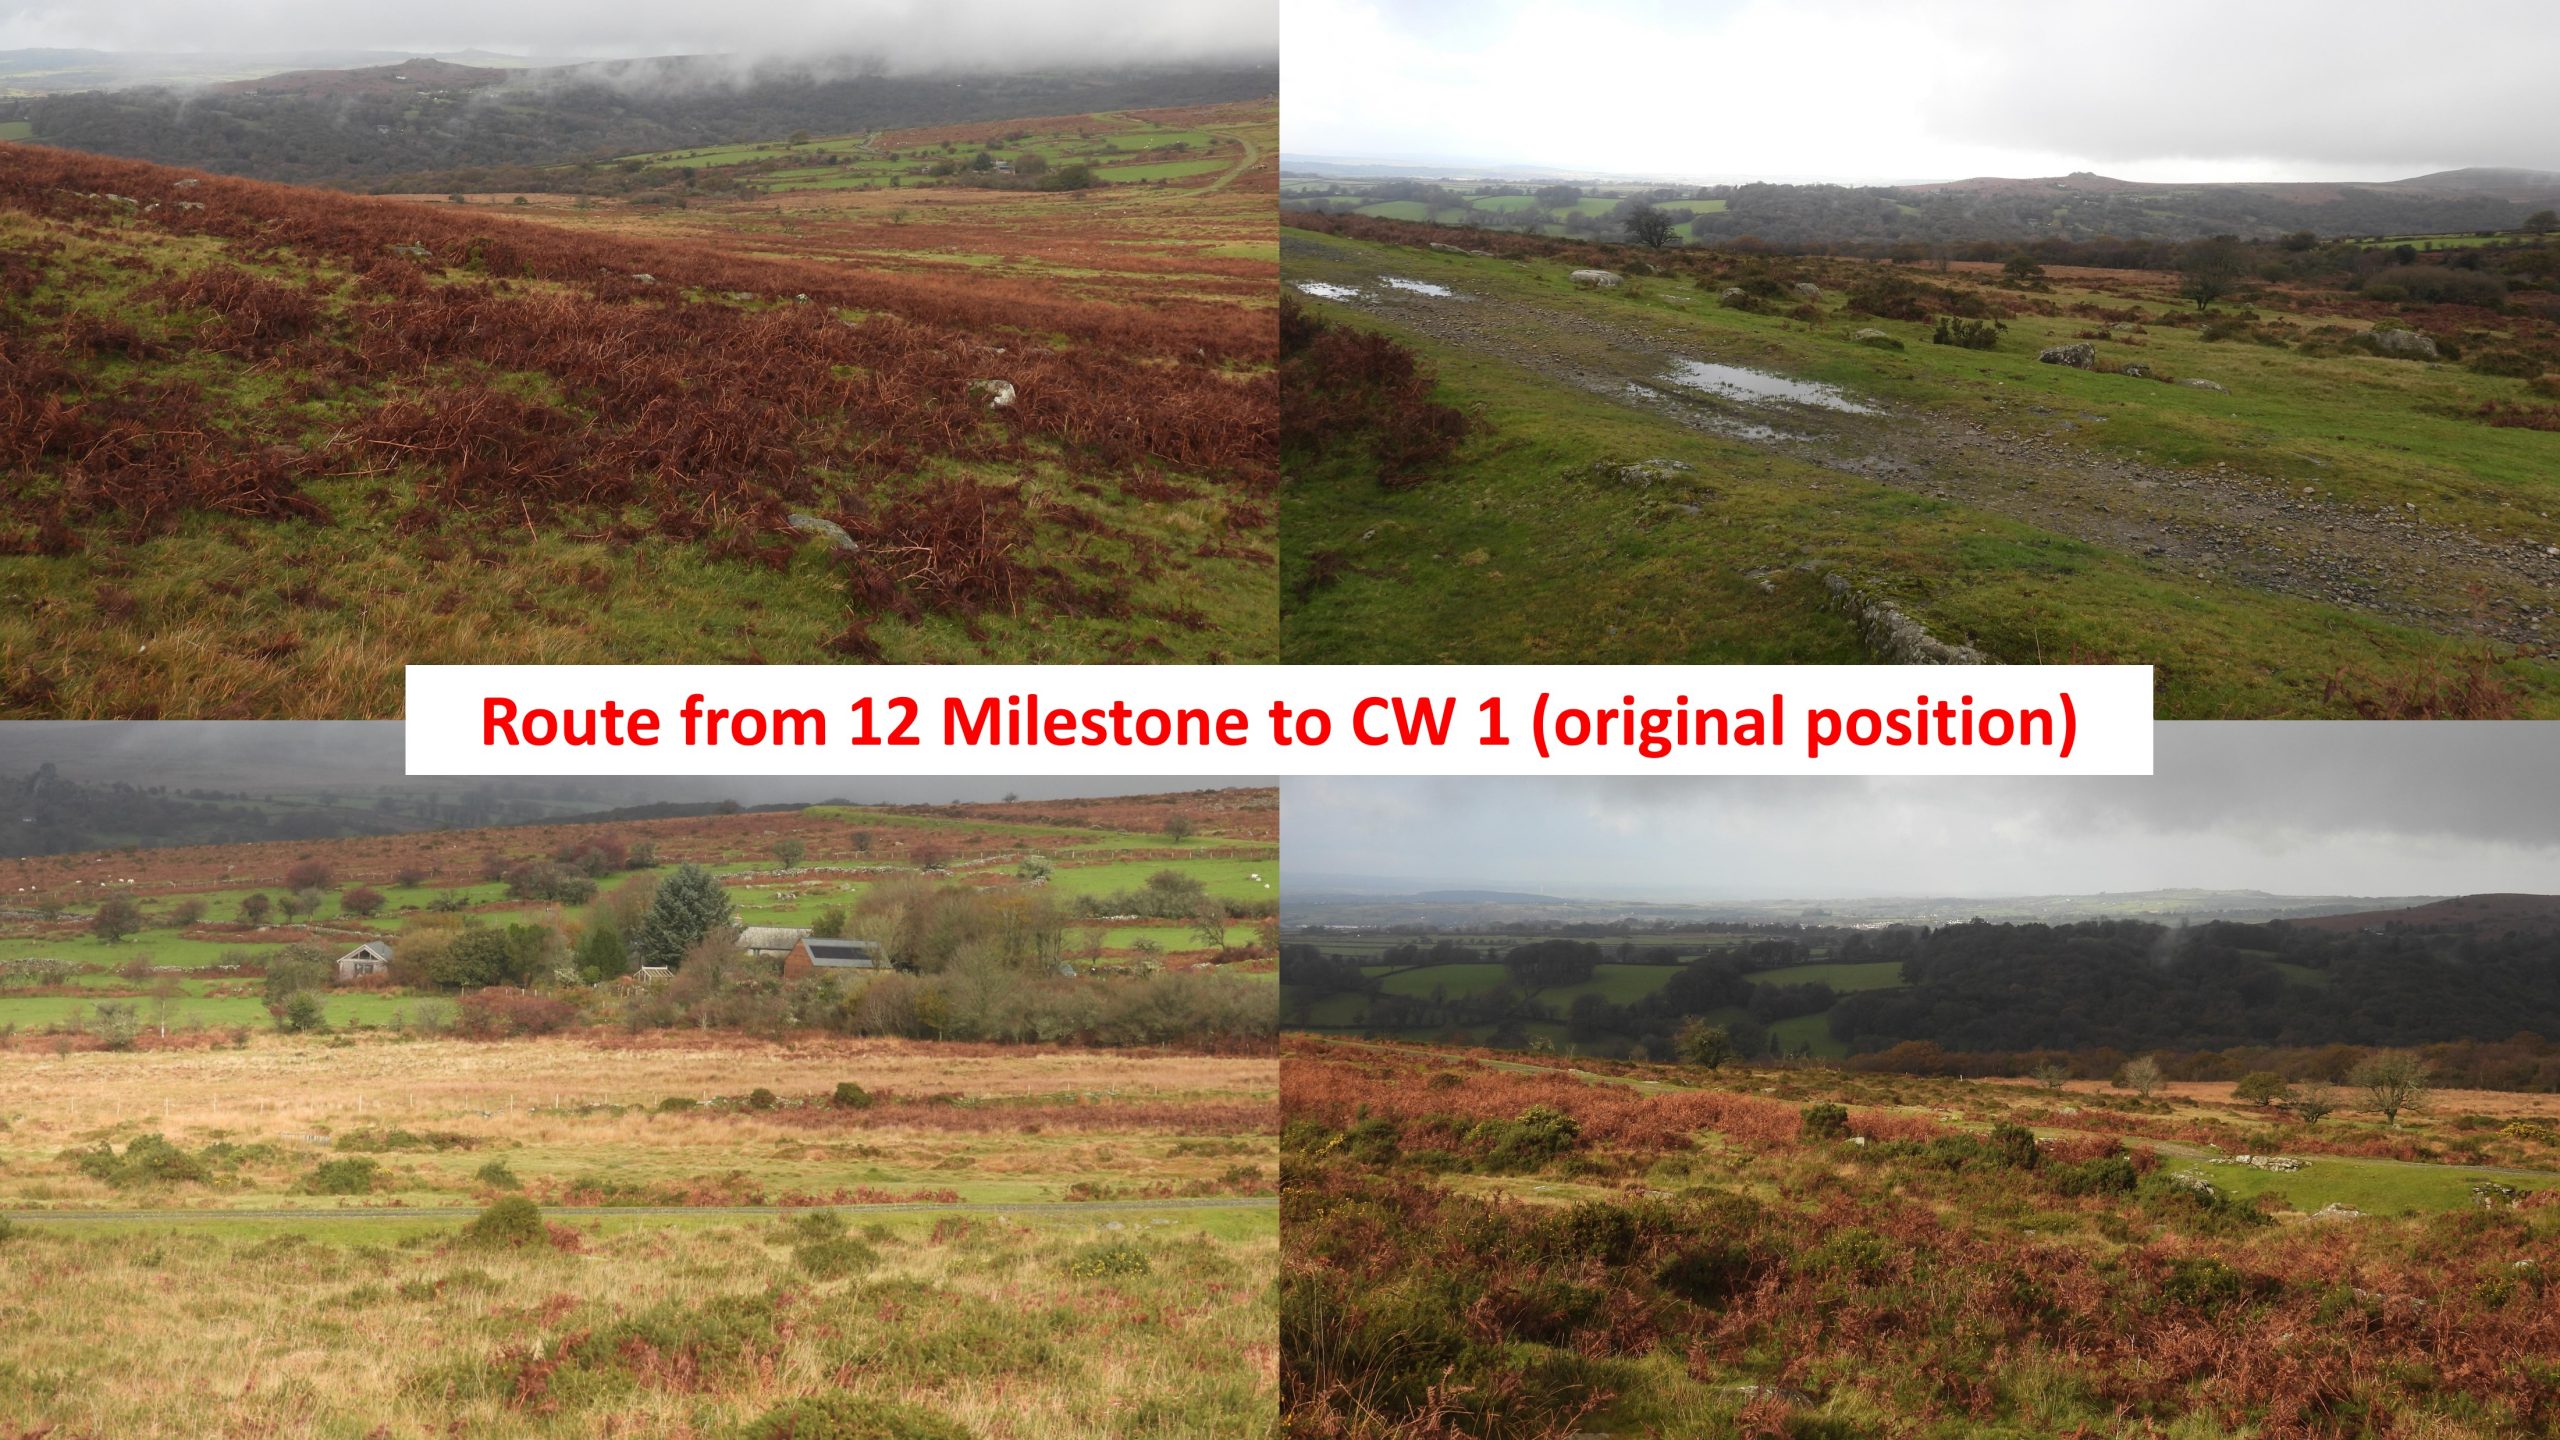 5. Route from 12 Milestone to CW1 original